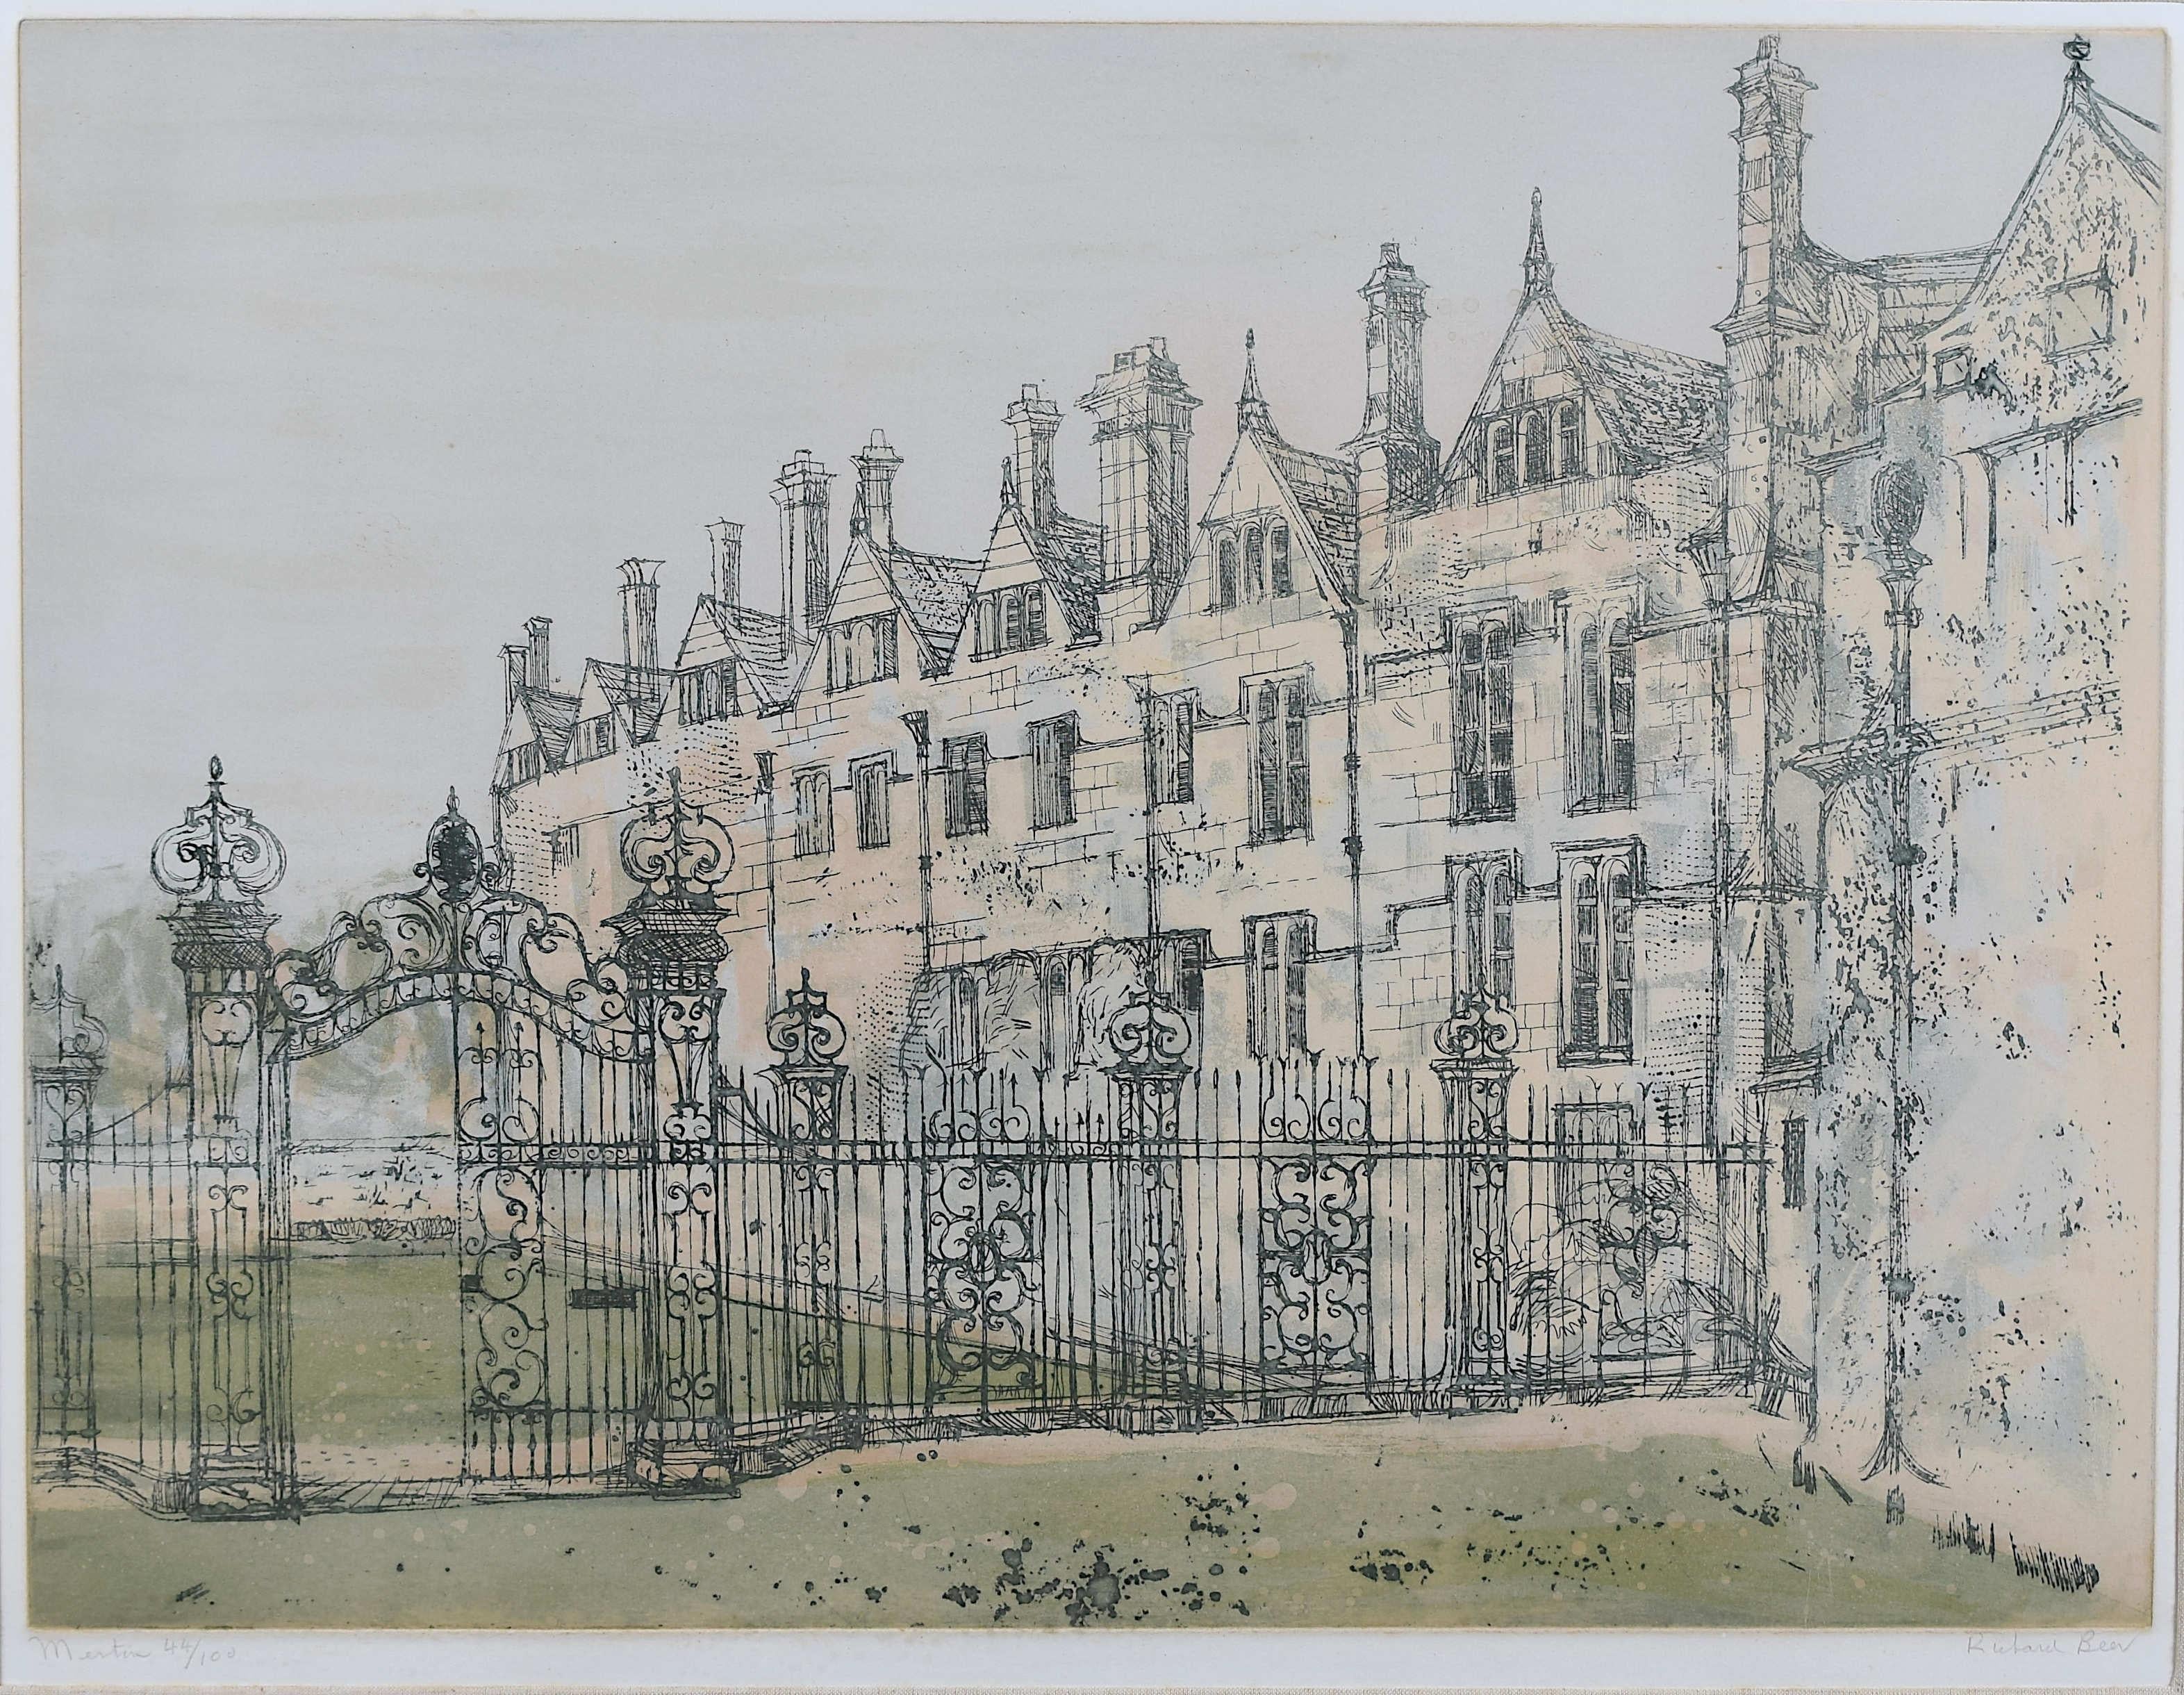 To see our other Modern British Art, scroll down to "More from this Seller" and below it click on "See all from this Seller" - or send us a message if you cannot find the artist you want.

Richard Beer (1928 - 2017)
Merton College, Oxford
Etching